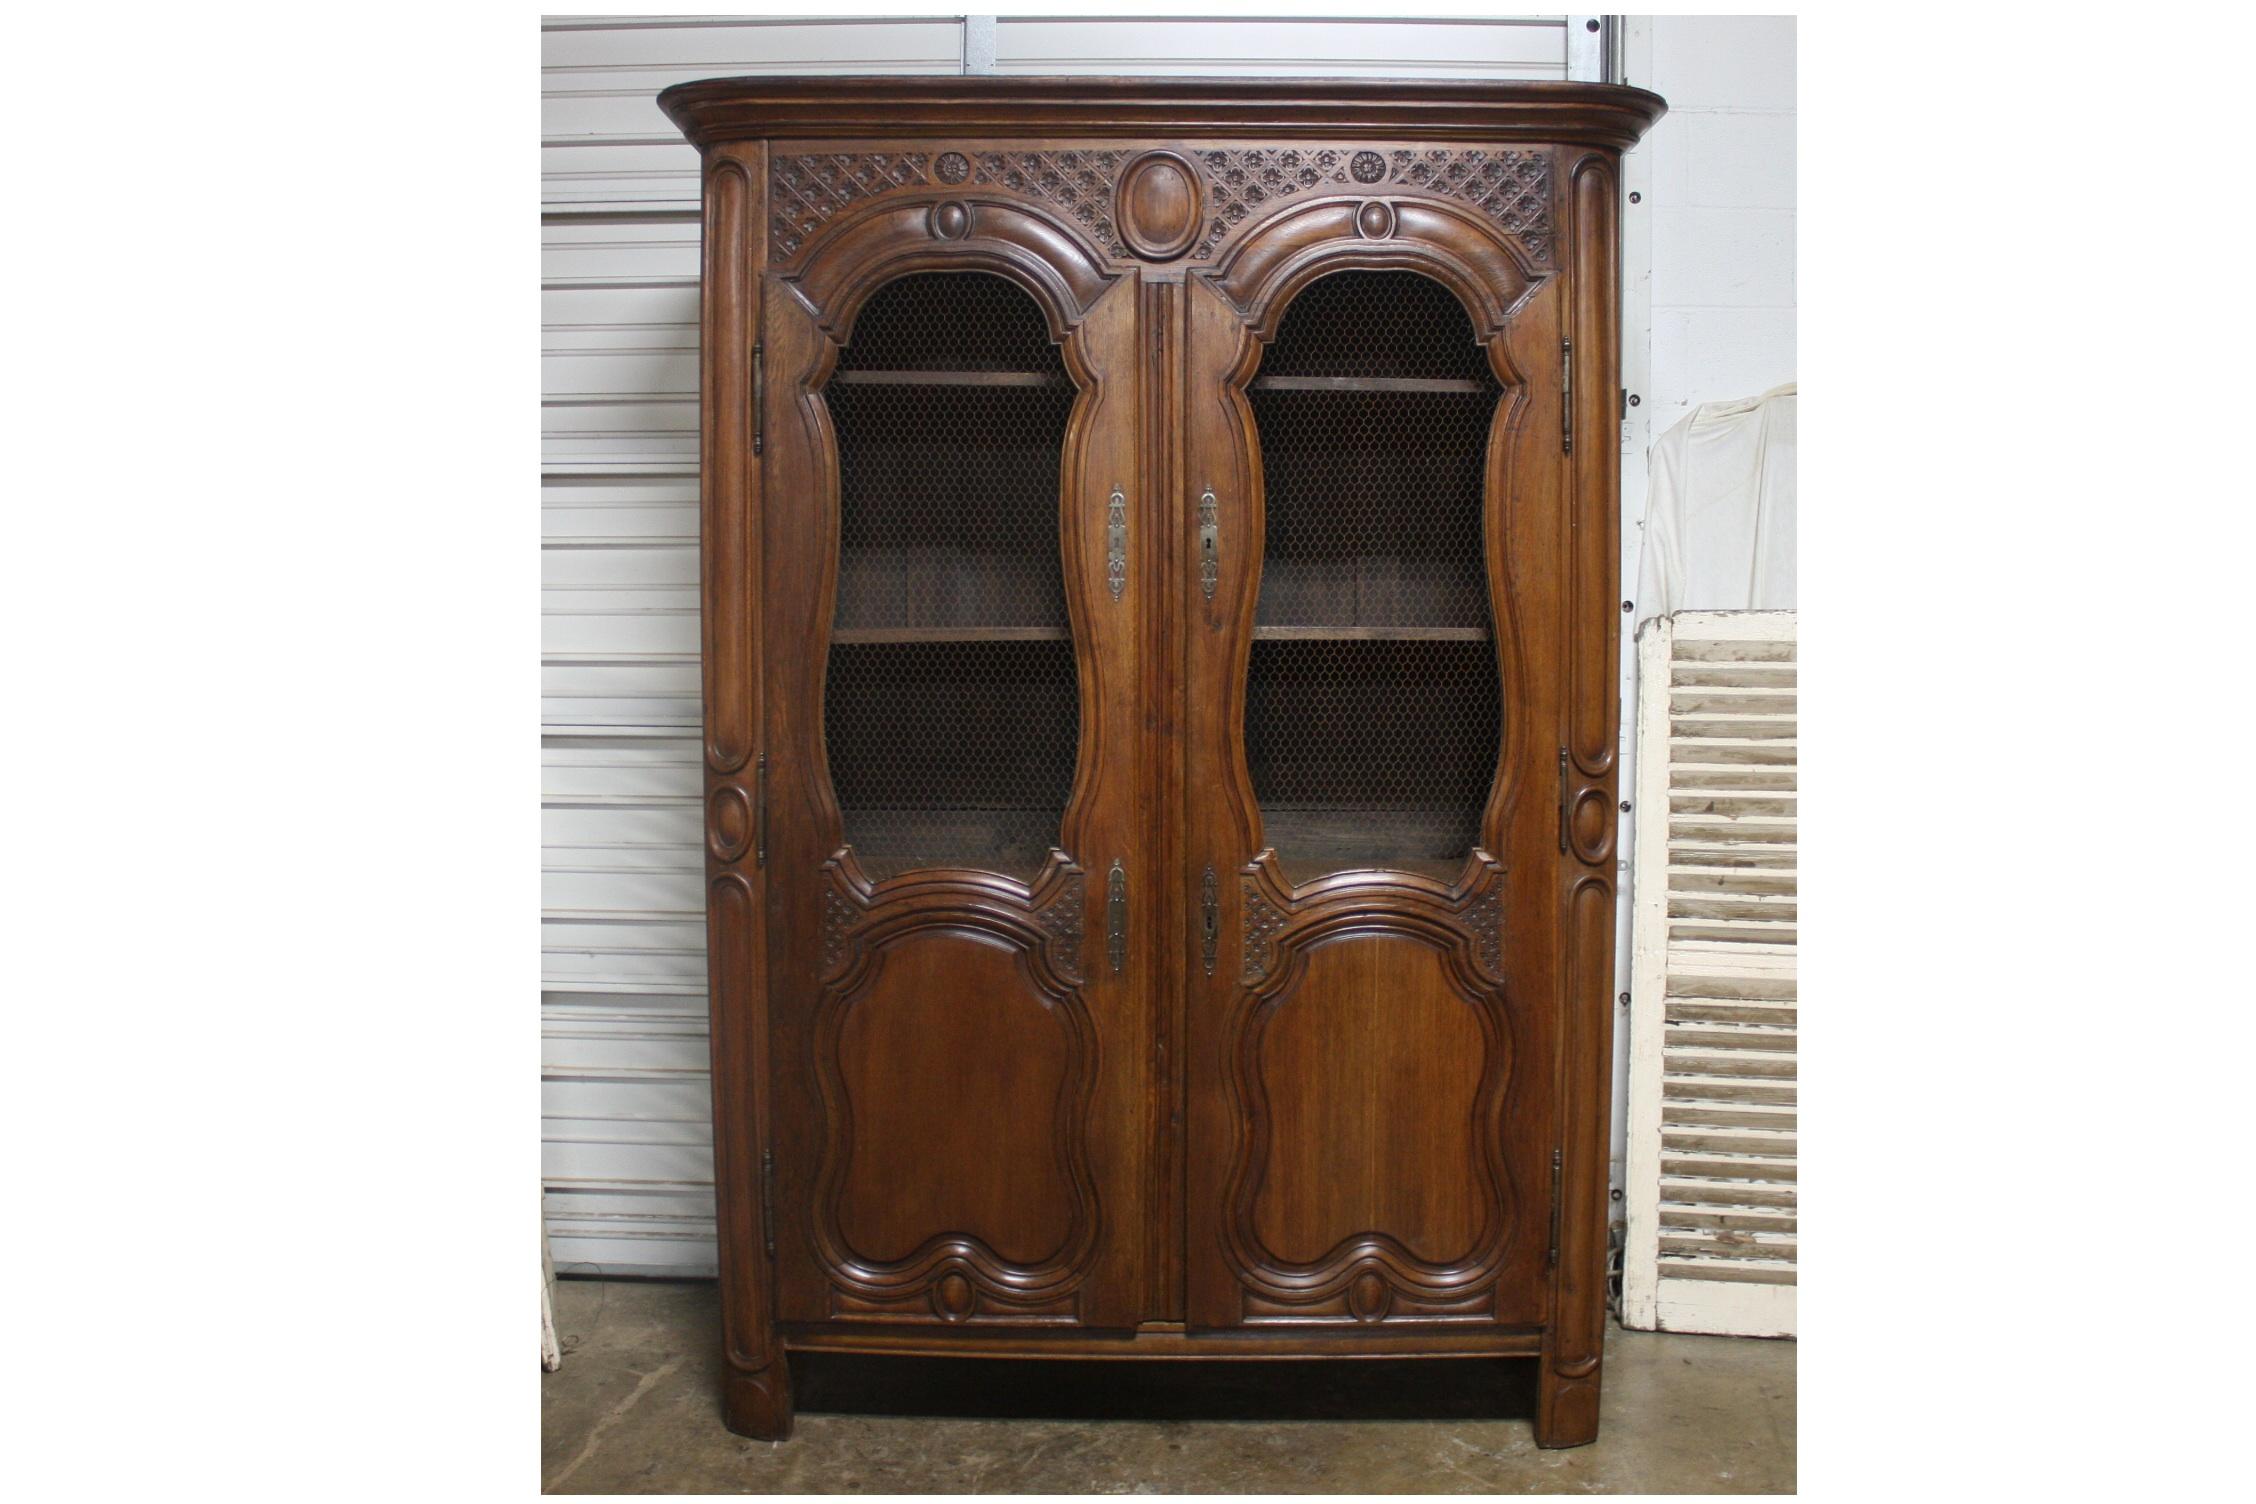 This wonderful rustic vitrine or bookcase has beautiful carvings with chicken wire on the doors. The dimensions of the body are 60.25''W x 18.5''D.
The inside depth is 14.5''D.